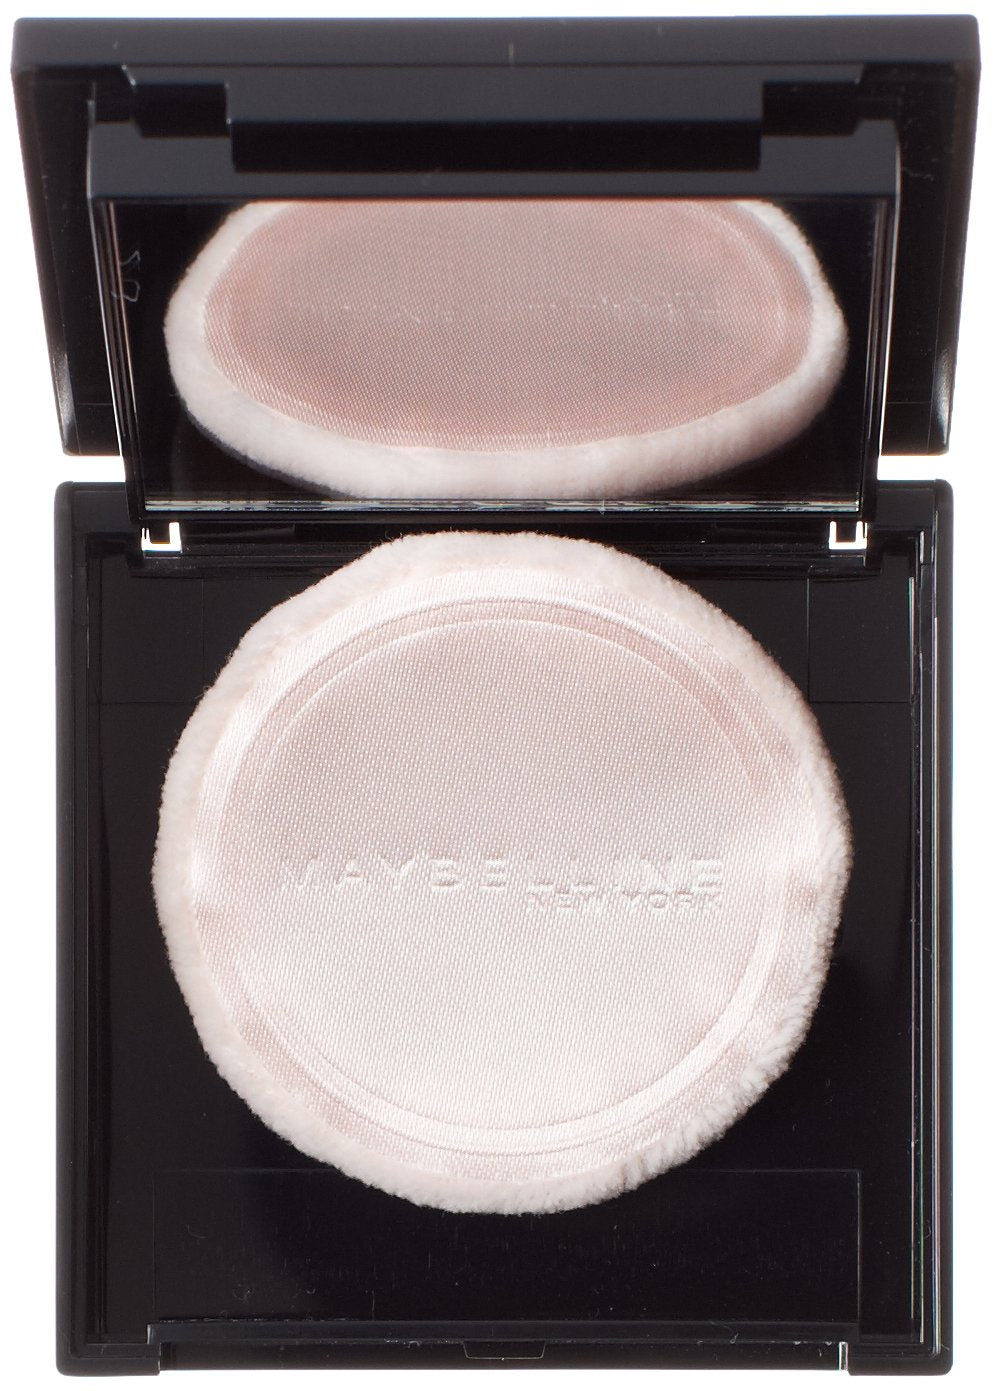 Maybelline New York Fit Me! Pressed Powder, 340 Cappuccino, 0.3 Ounce